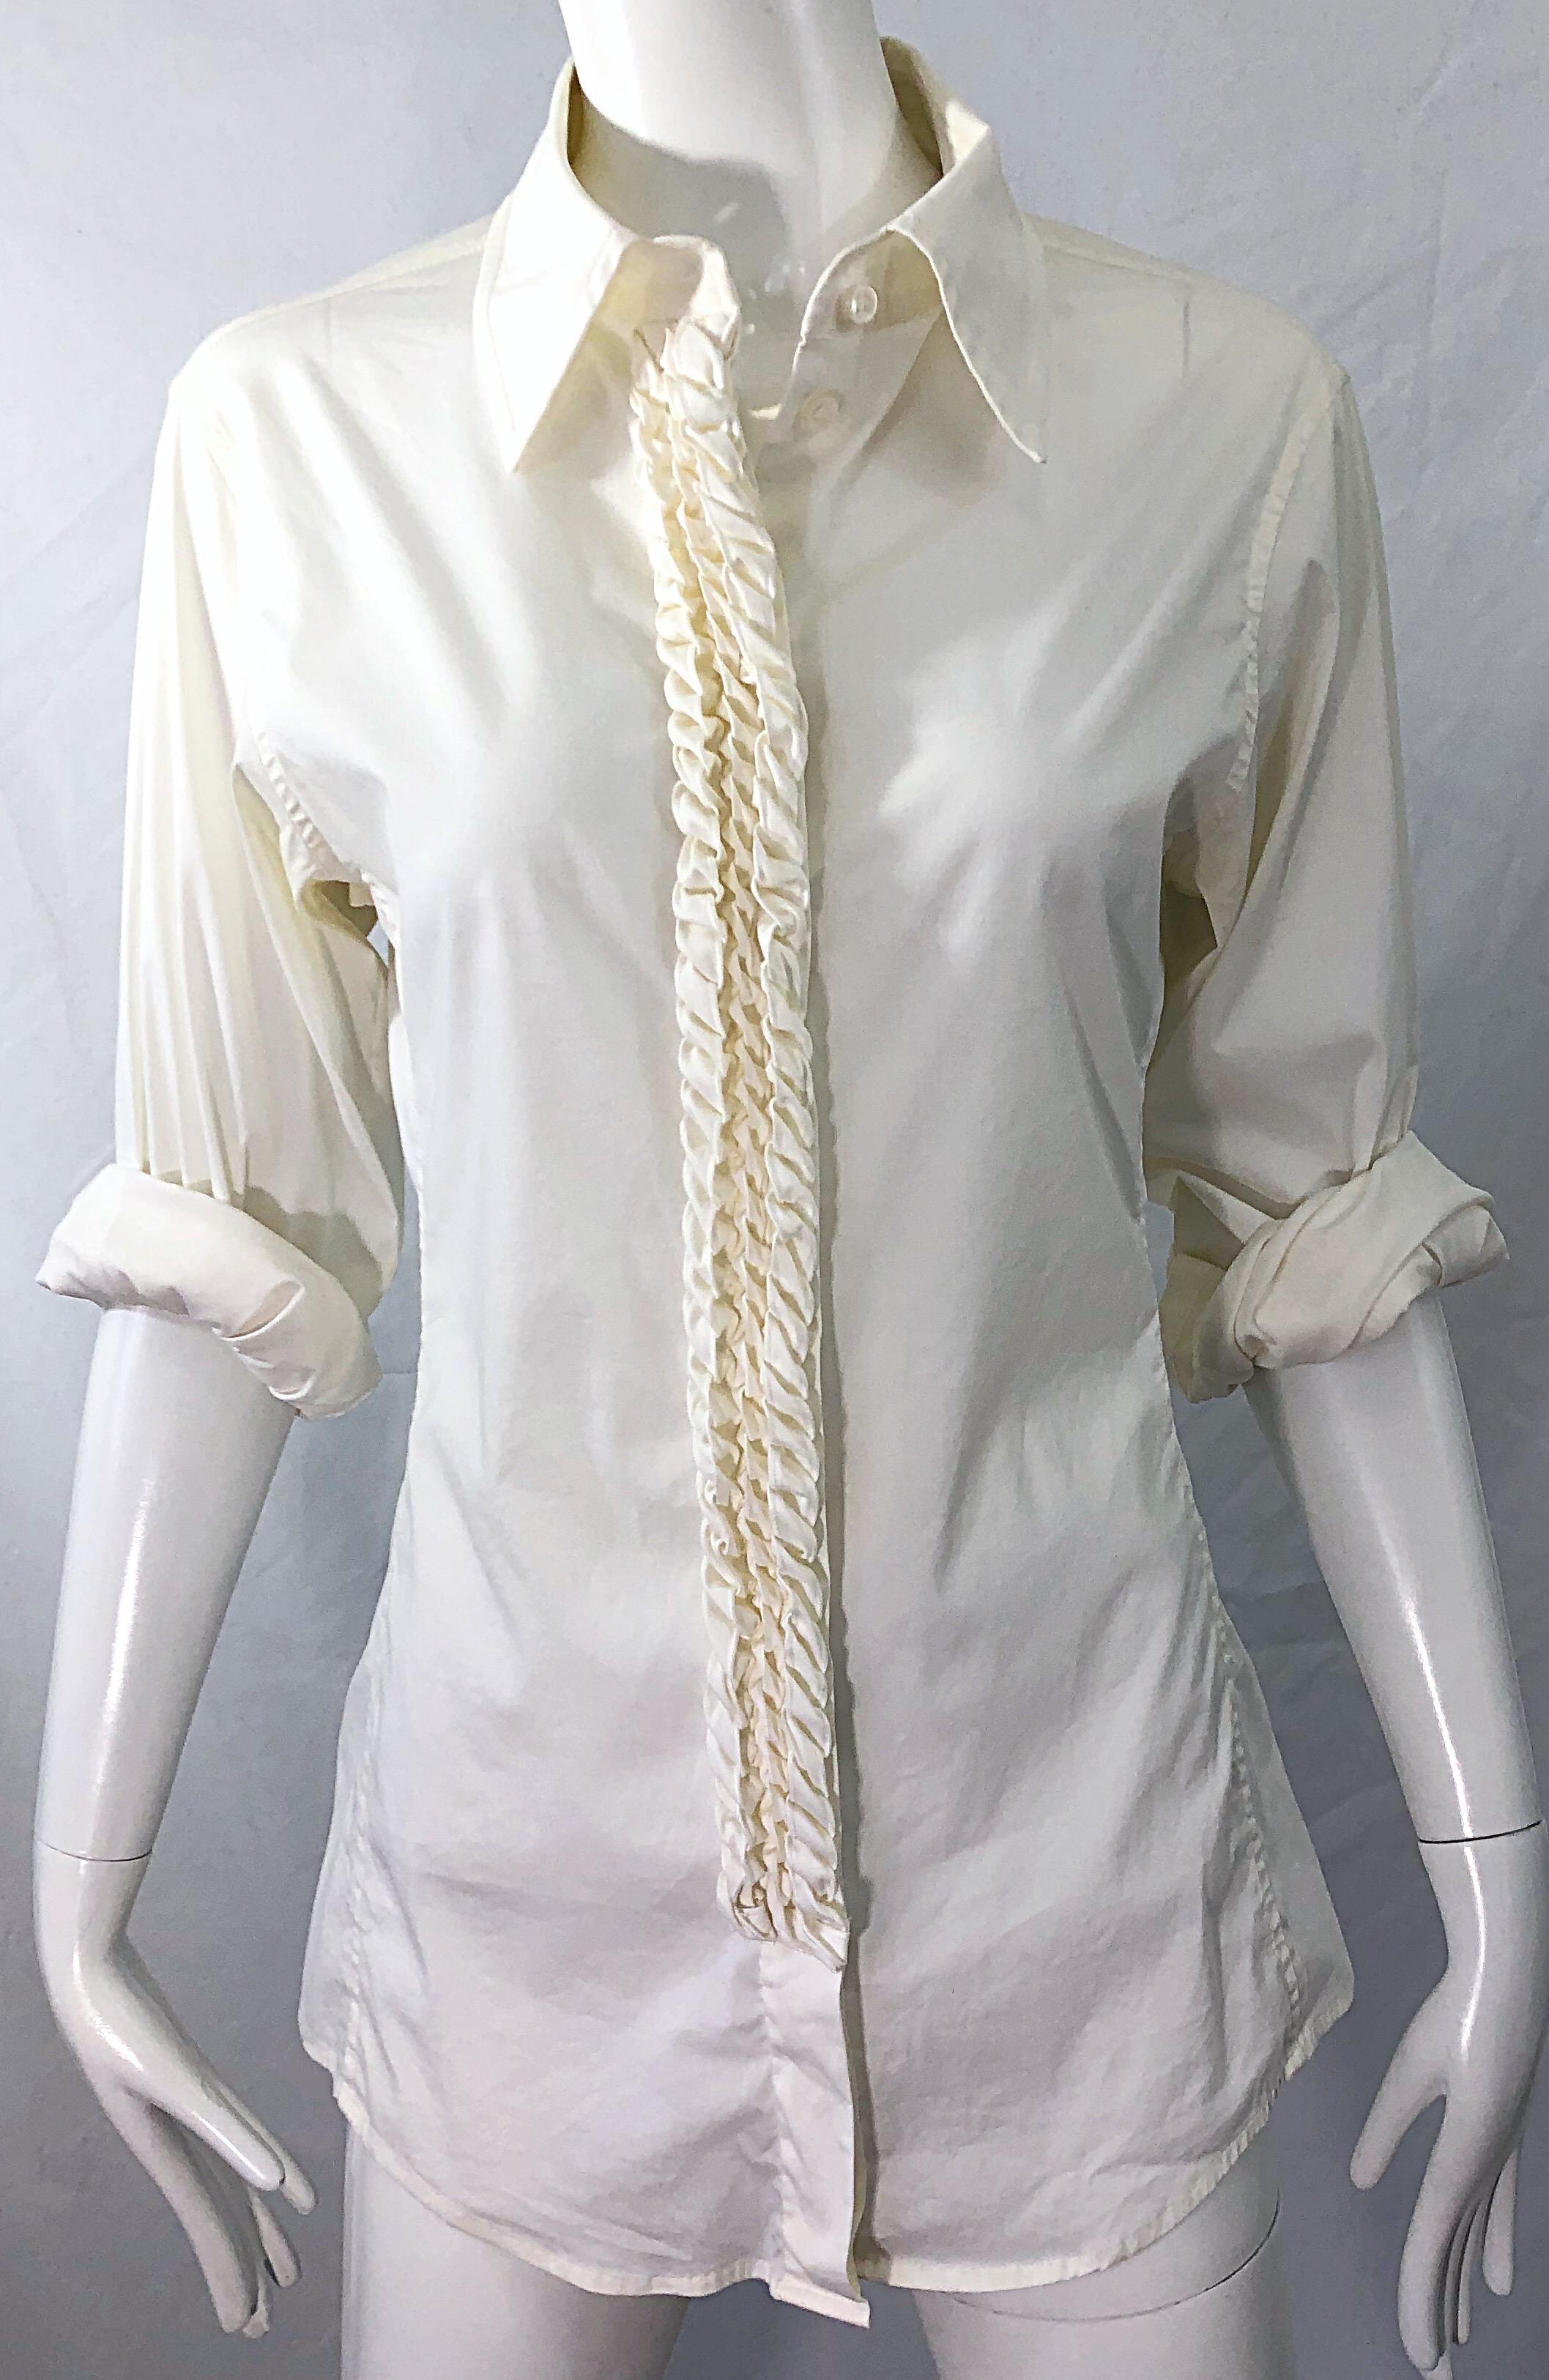 Yves Saint Laurent by Tom Ford YSL Size 40 / 8 Ivory White Tuxedo Blouse Shirt In Excellent Condition For Sale In San Diego, CA